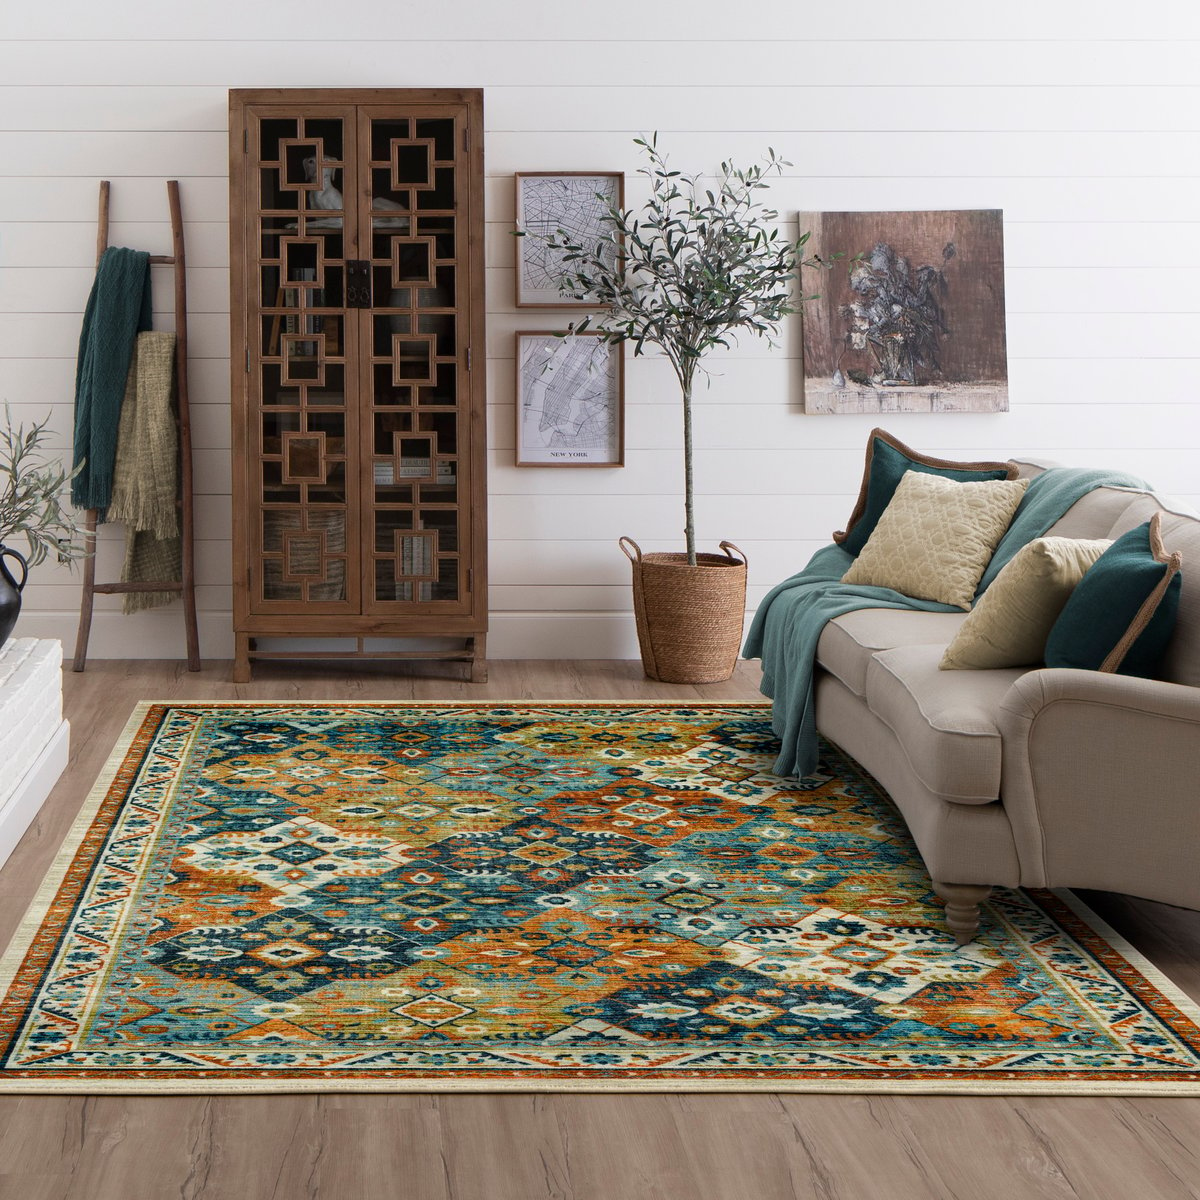 https://image1.rugs-direct.com/cdn-cgi/image/width=1200,height=1200/rug_gallery/00277/20775/148724/239038/ws_mele_multi_zs013a416096120_style1.jpg